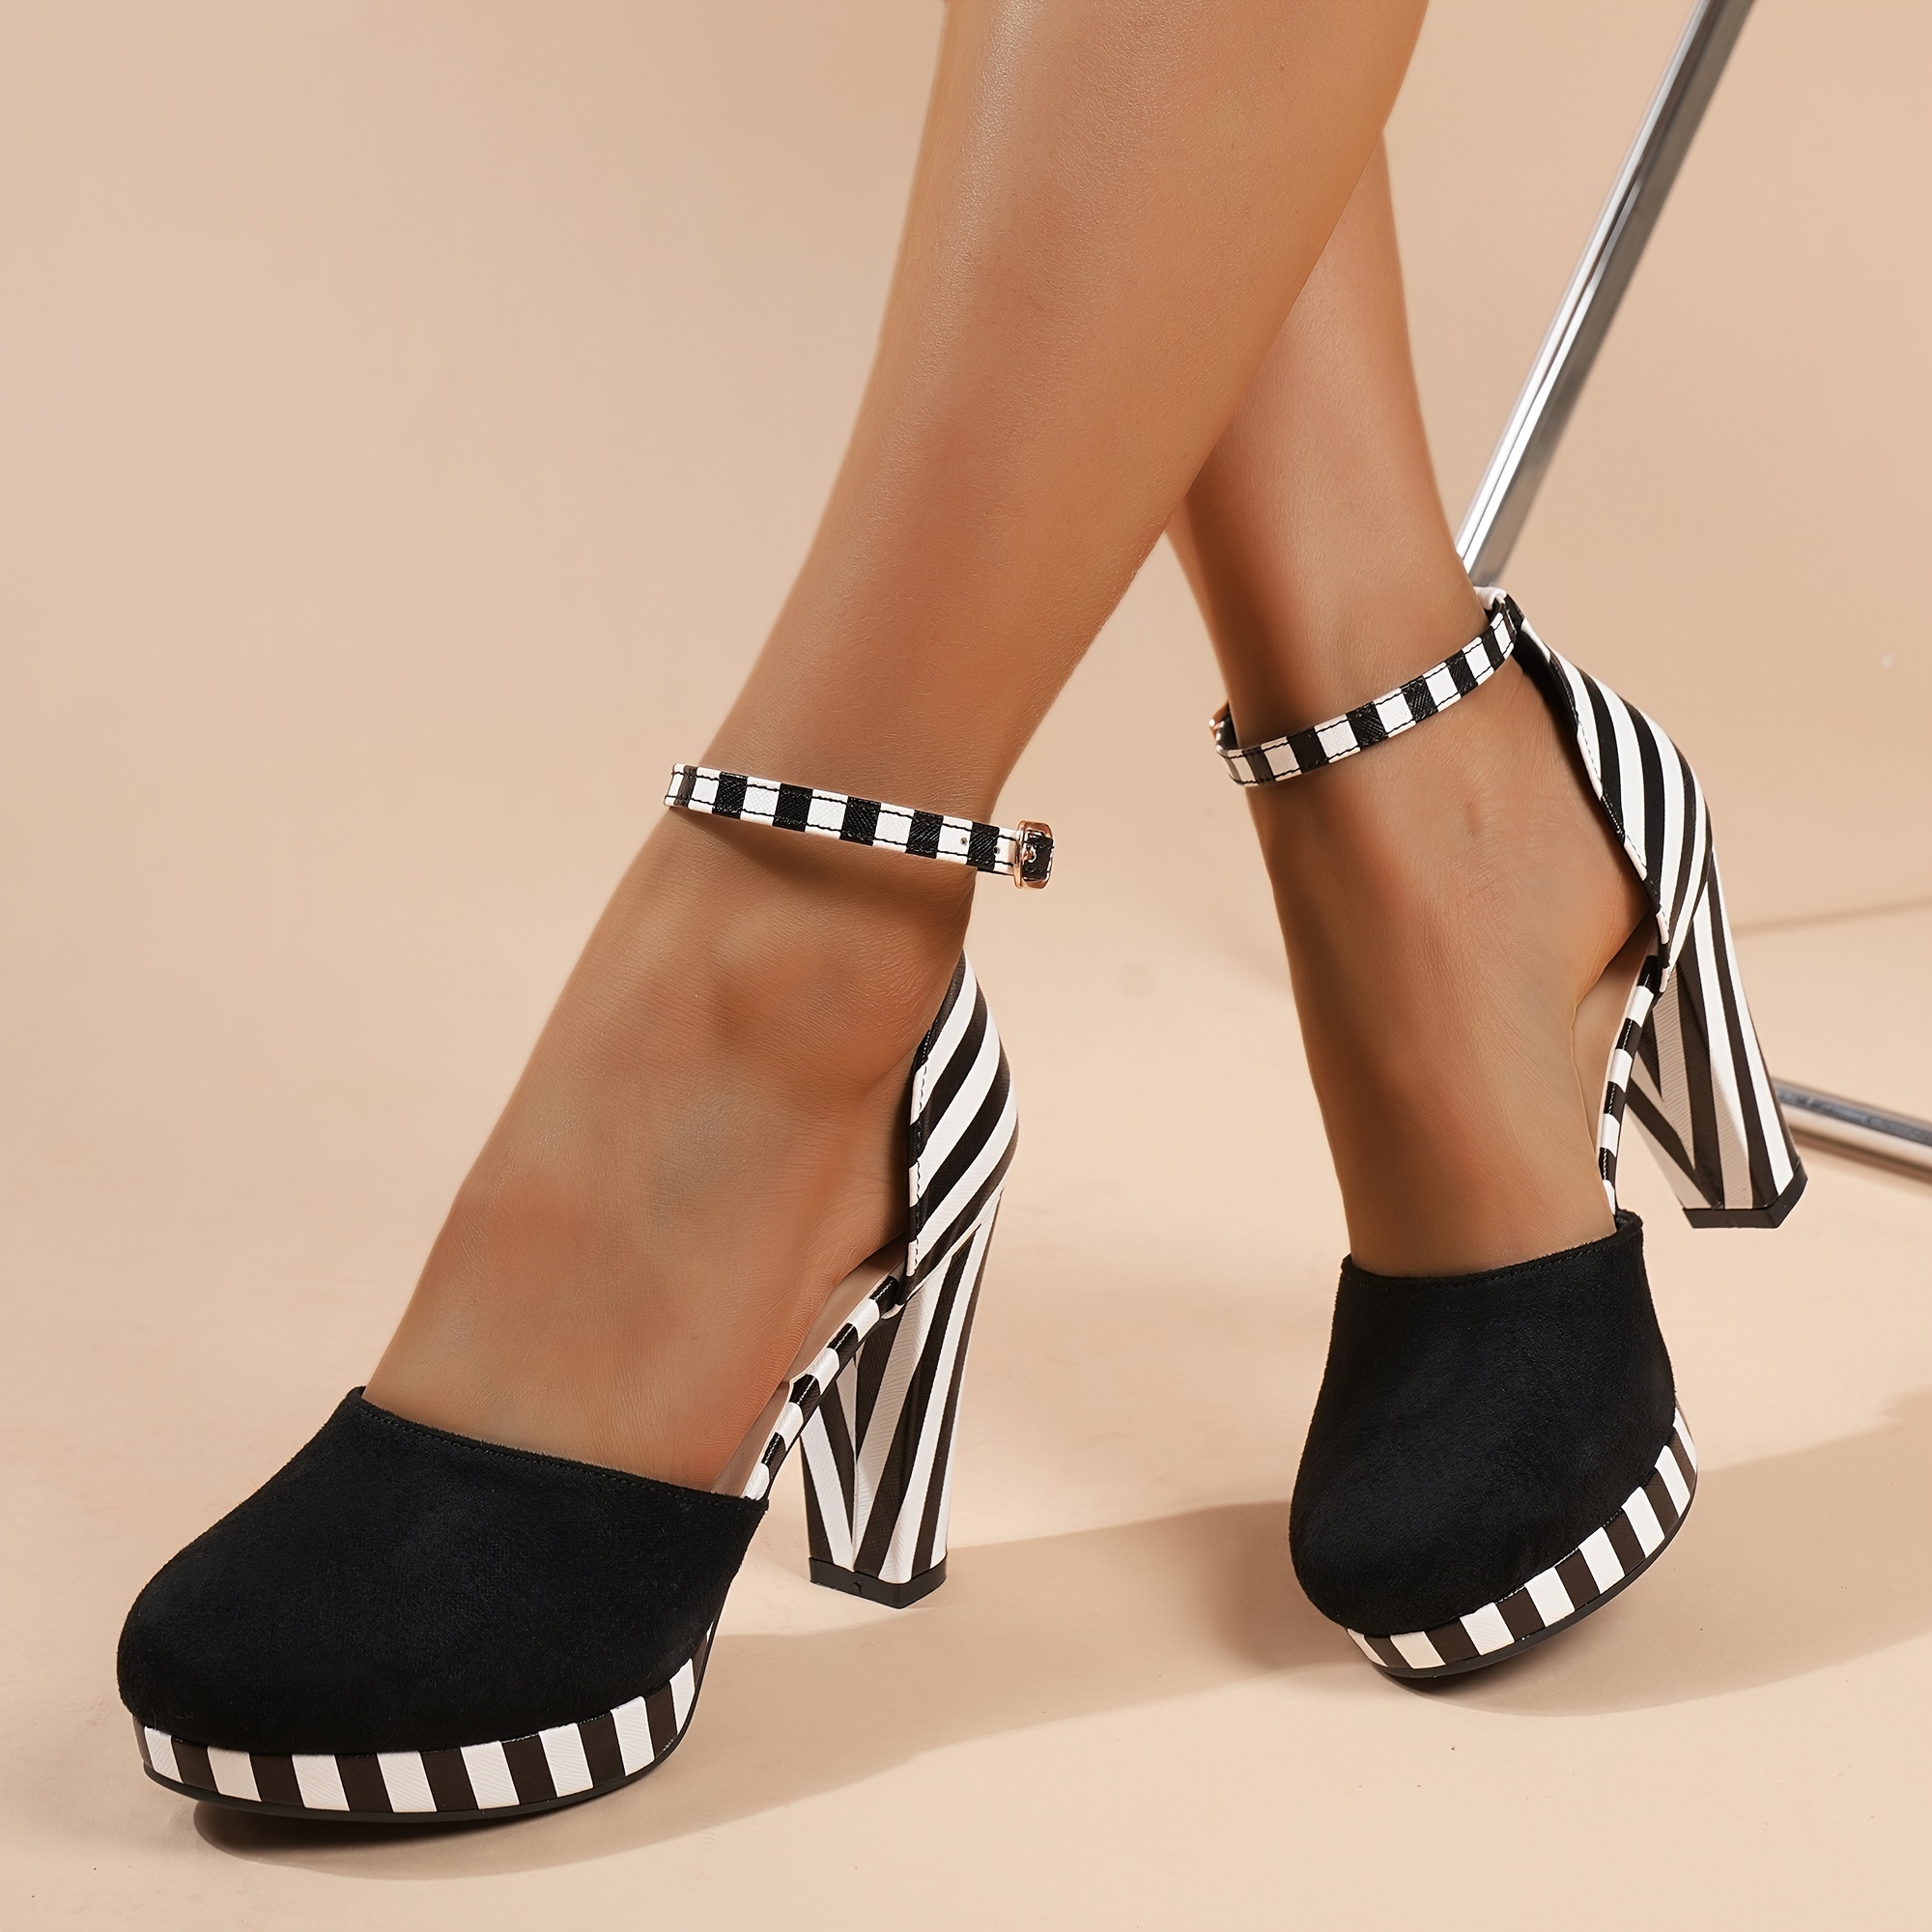 womens striped dorsay high heels fashion ankle strap platform sandals all match party dress shoes details 3